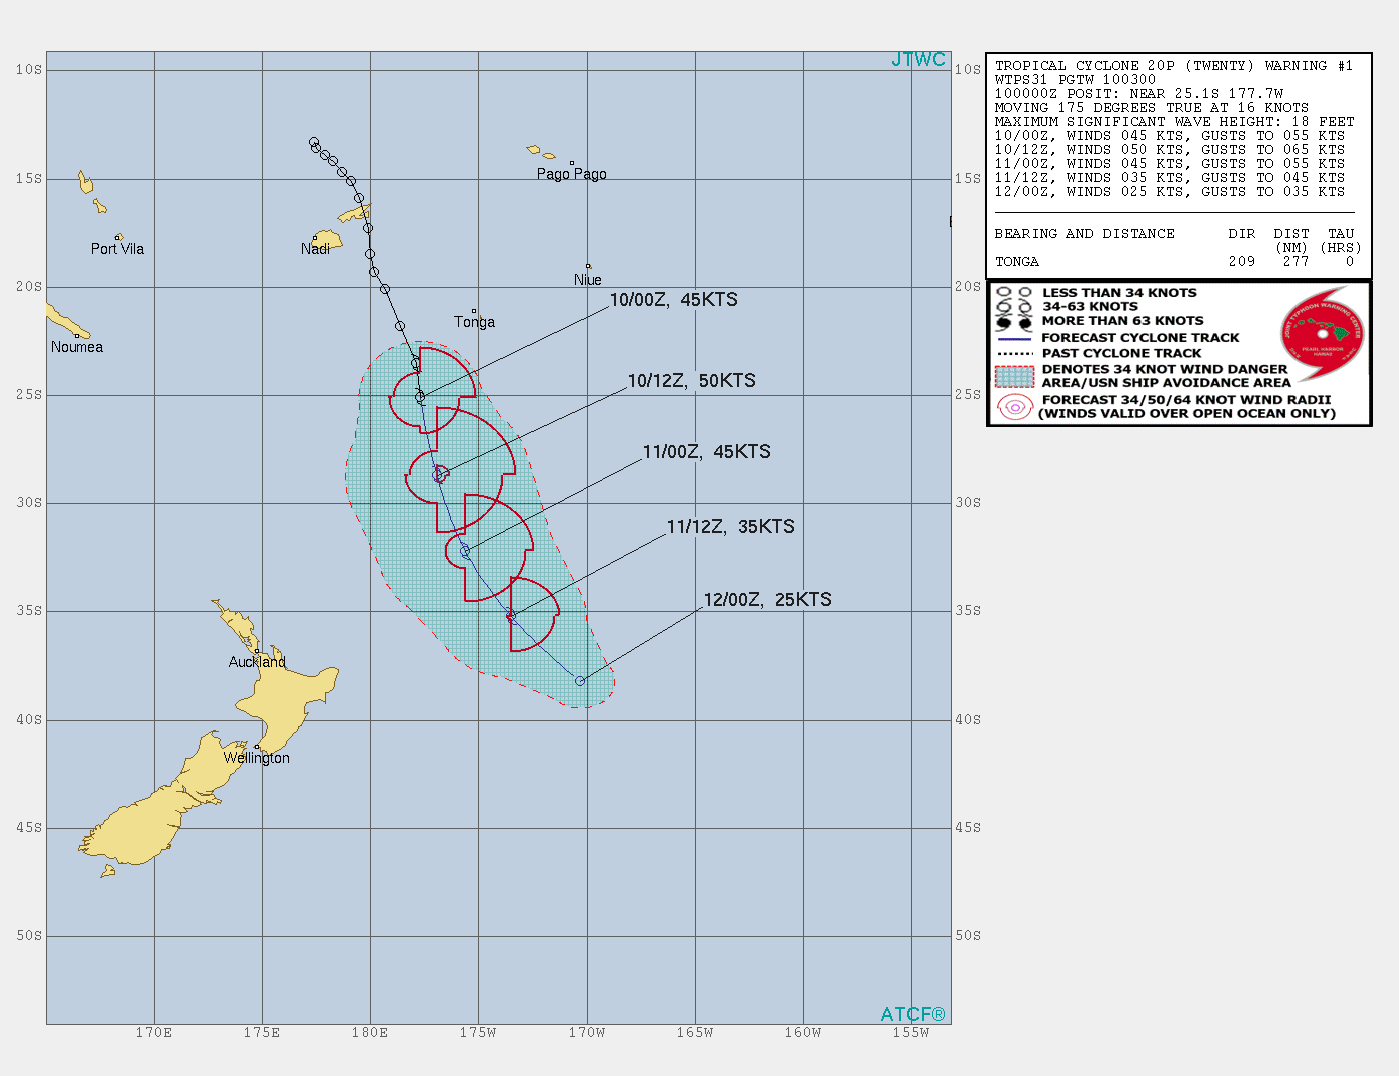 20P(TWENTY). WARNING 1 ISSUED AT 10/03UTC.TC 20P IS TRACKING ALONG  THE WESTERN PERIPHERY OF AN EXTENSION OF A NEAR EQUATORIAL RIDGE  (NER)POSITIONED TO THE NORTHEAST. THE NER IS EXPECTED TO STEER THE  SYSTEM GENERALLY SOUTH-SOUTHEASTWARD FOR THE DURATION OF THE  FORECAST. IN THE NEAR TERM, THE CONDUCIVE SEA SURFACE TEMPS AND ROBUST OUTFLOW  ALOFT WILL ALLOW THE SYSTEM A BRIEF PERIOD OF INTENSIFICATION TO 50  KNOTS BY 12H. AFTERWARDS, THE SYSTEM WILL STEADILY WEAKEN DUE TO  CONTINUED HIGH VERTICAL WIND SHEAR AND RAPIDLY COOLING SEAS (20-21 CELSIUS BY 48H). BY 24H, THE SYSTEM WILL BEGIN TO INTERACT WITH THE  BAROCLINIC ZONE AND START EXTRATROPICAL TRANSITION.